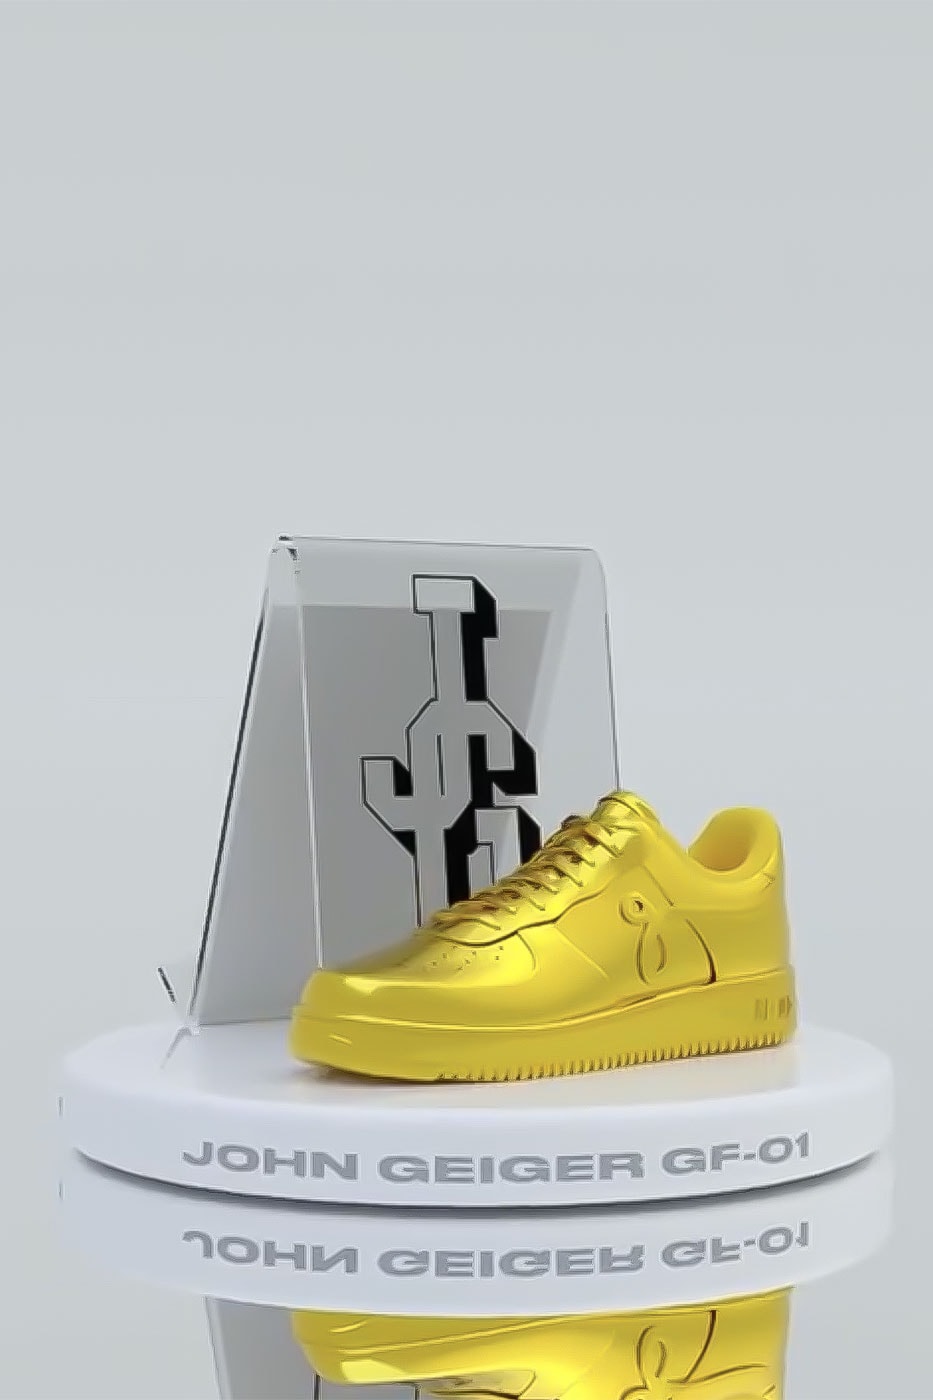 John geiger first nft gold silver bronze nike lawsuit gf-01 sneaker gold silver bronze signed papers physical art piece digital collectible release info discord